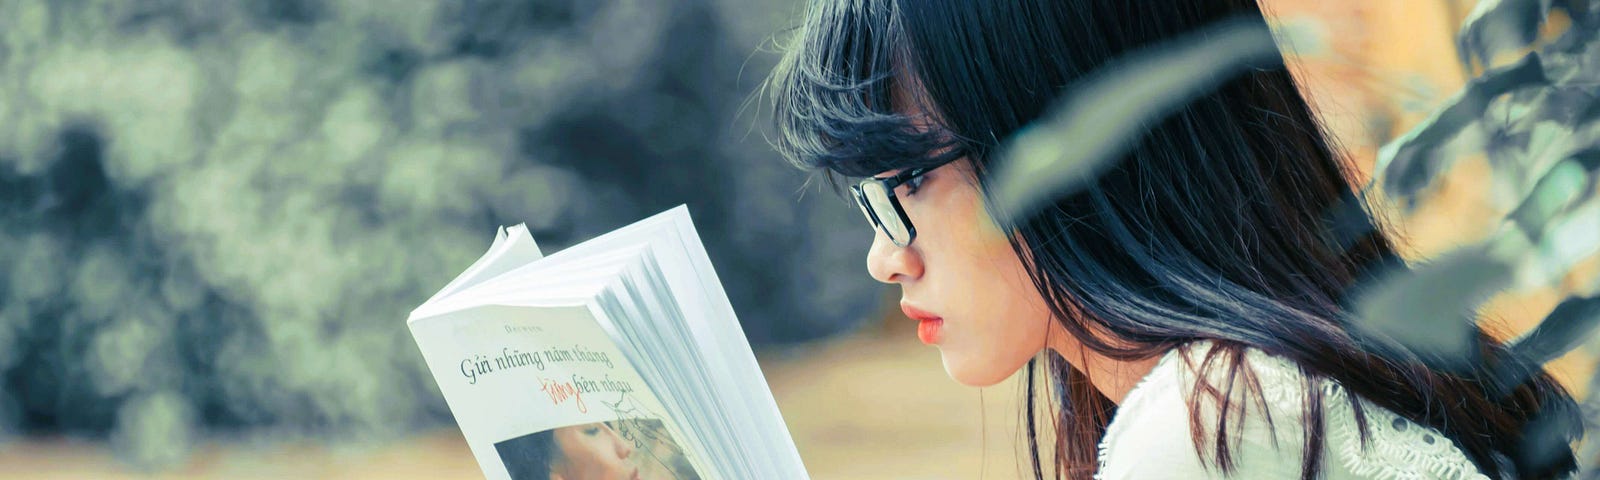 Asian woman reading a book outdoors.